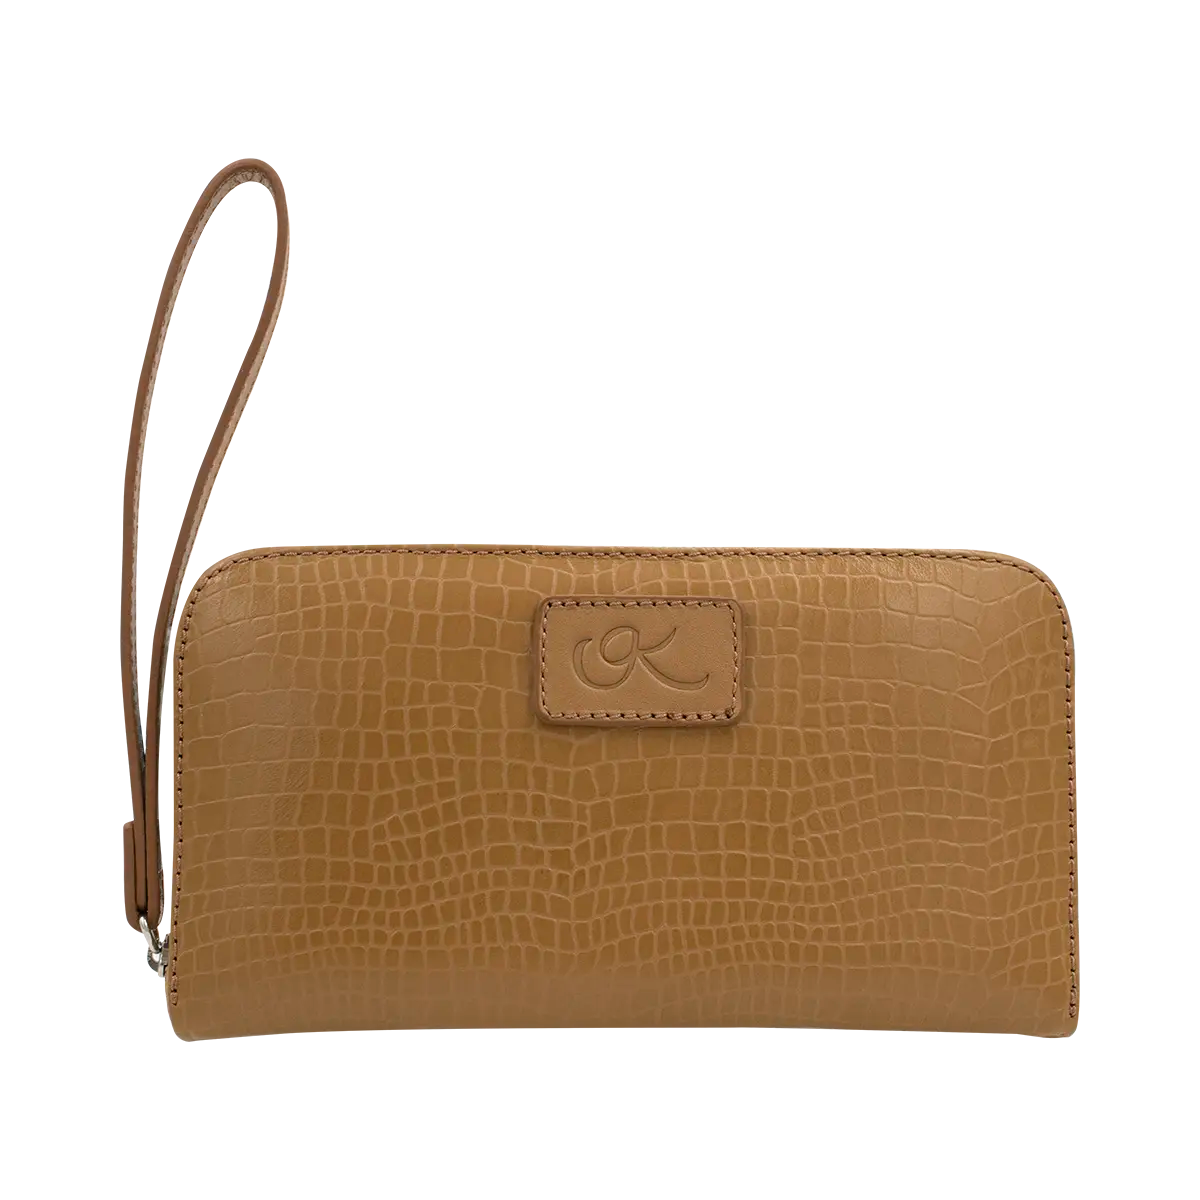 tan leather wallet with hand strap. Fashion Accessories for women shop in San Diego, CA.